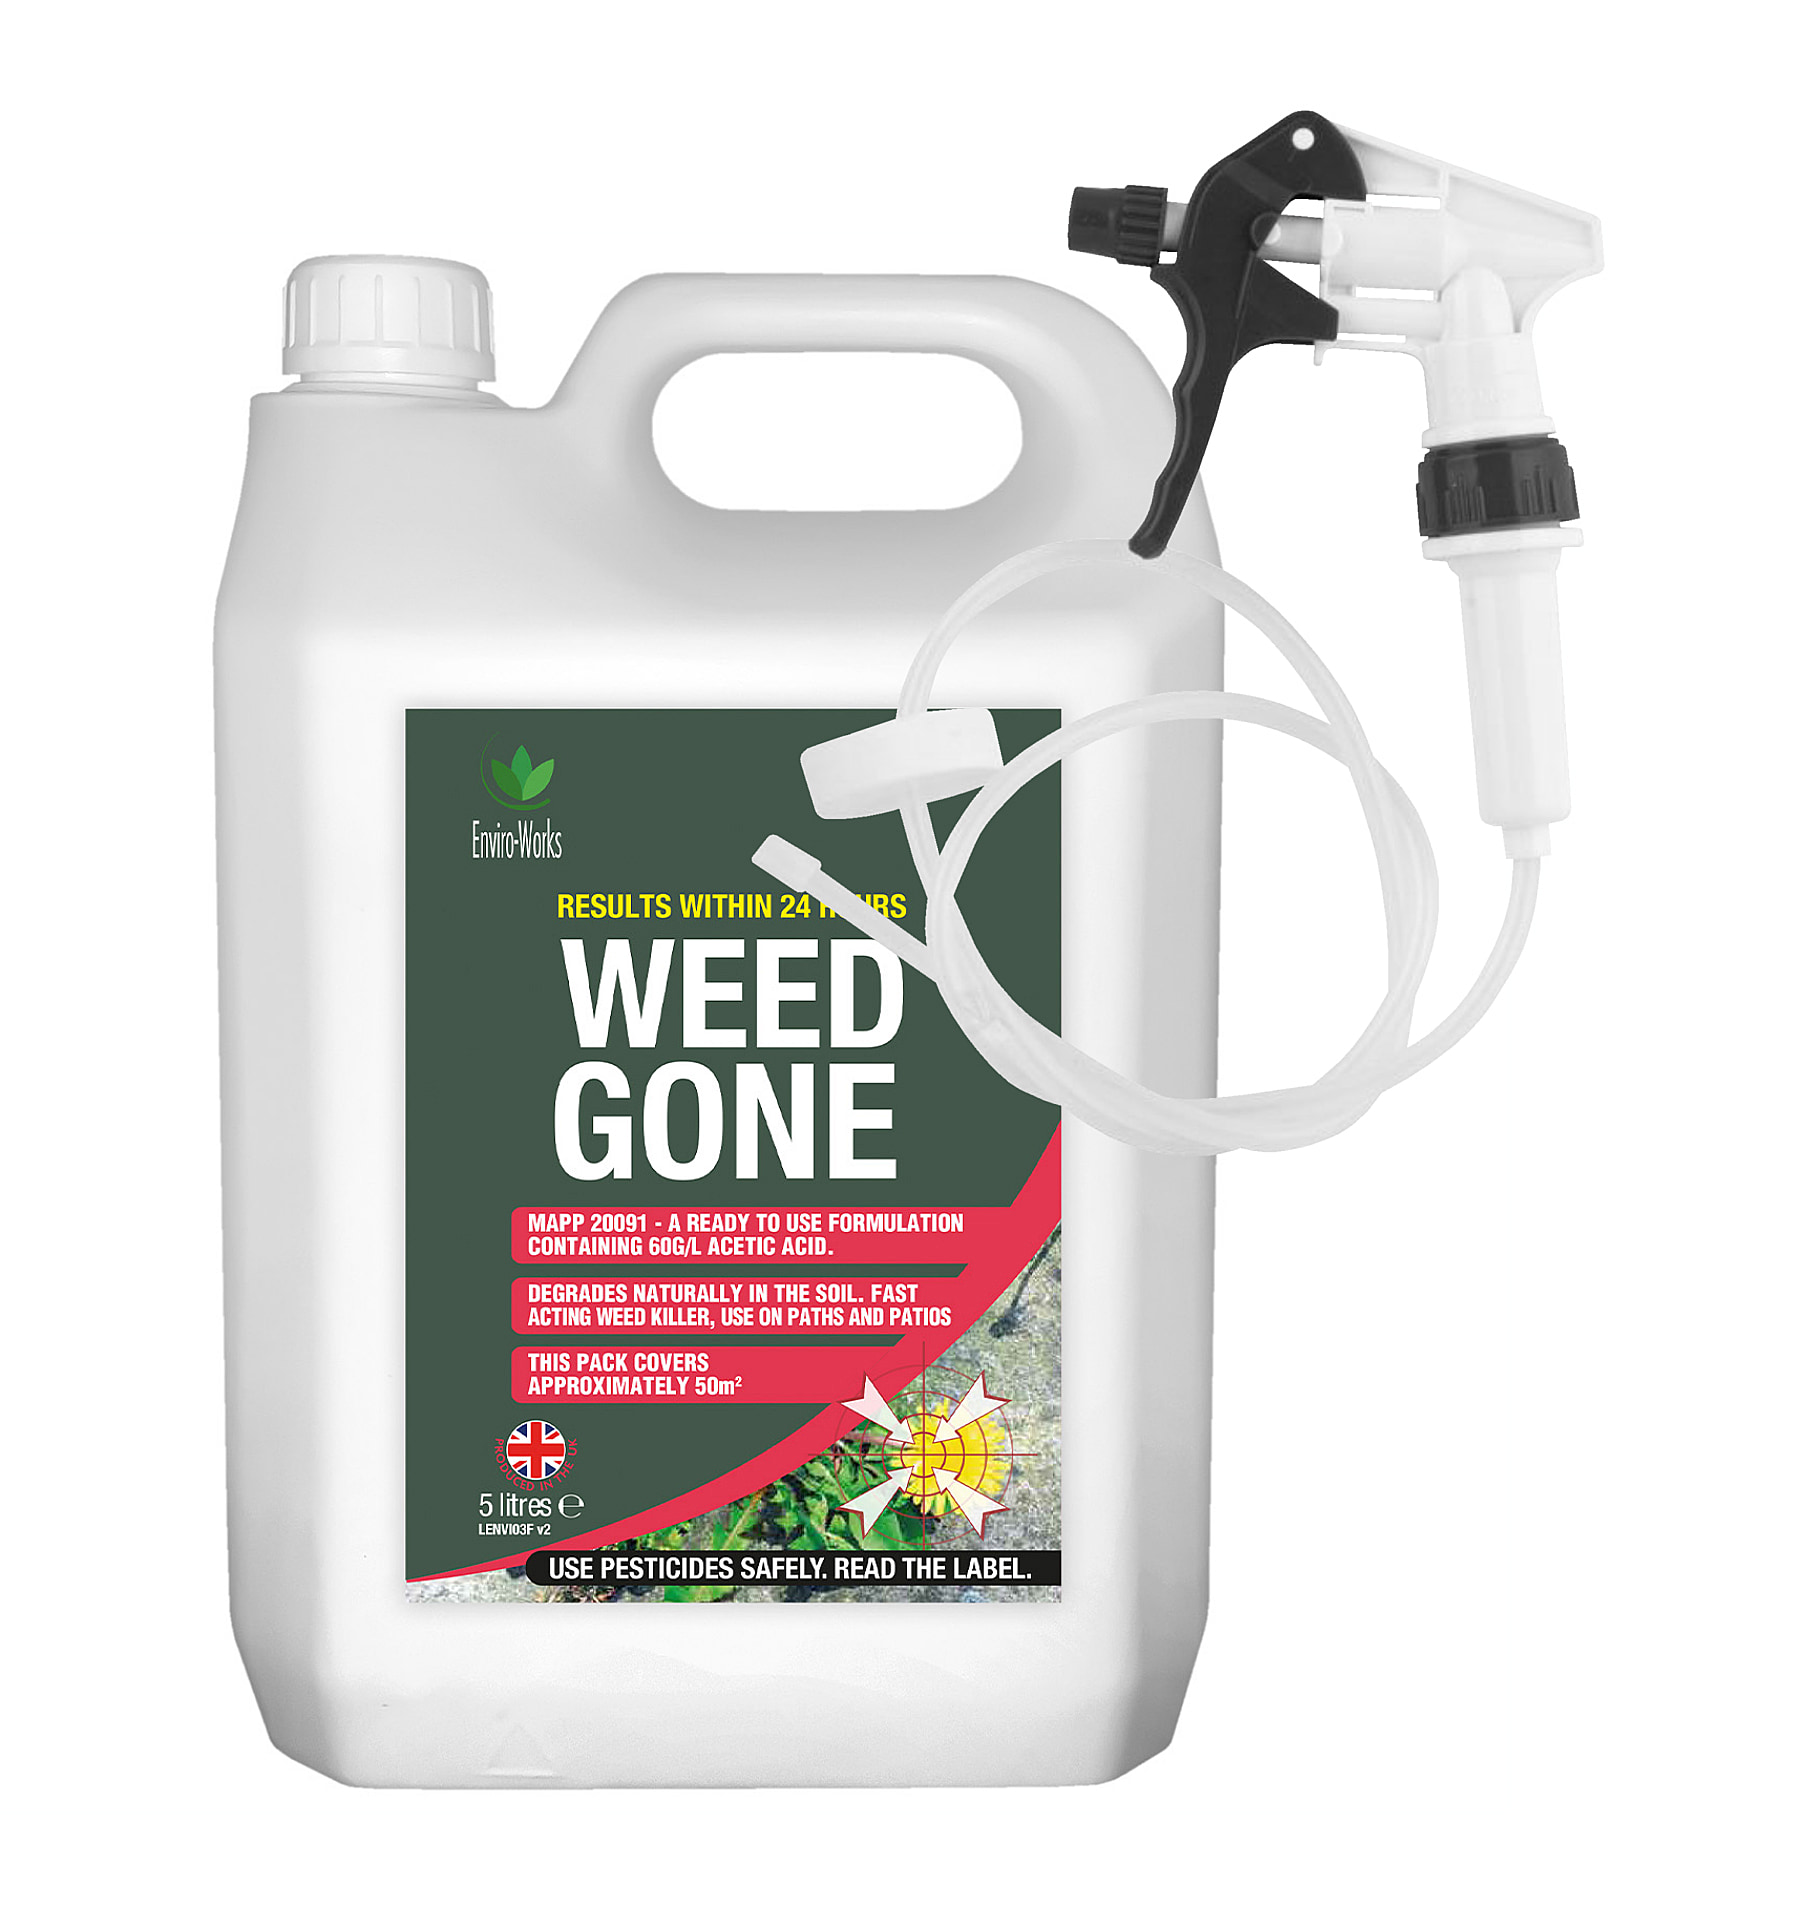 Enviroworks-Weed-Gone-Multi-Purpose-Cleaner-Size-12x17x28-cm-White